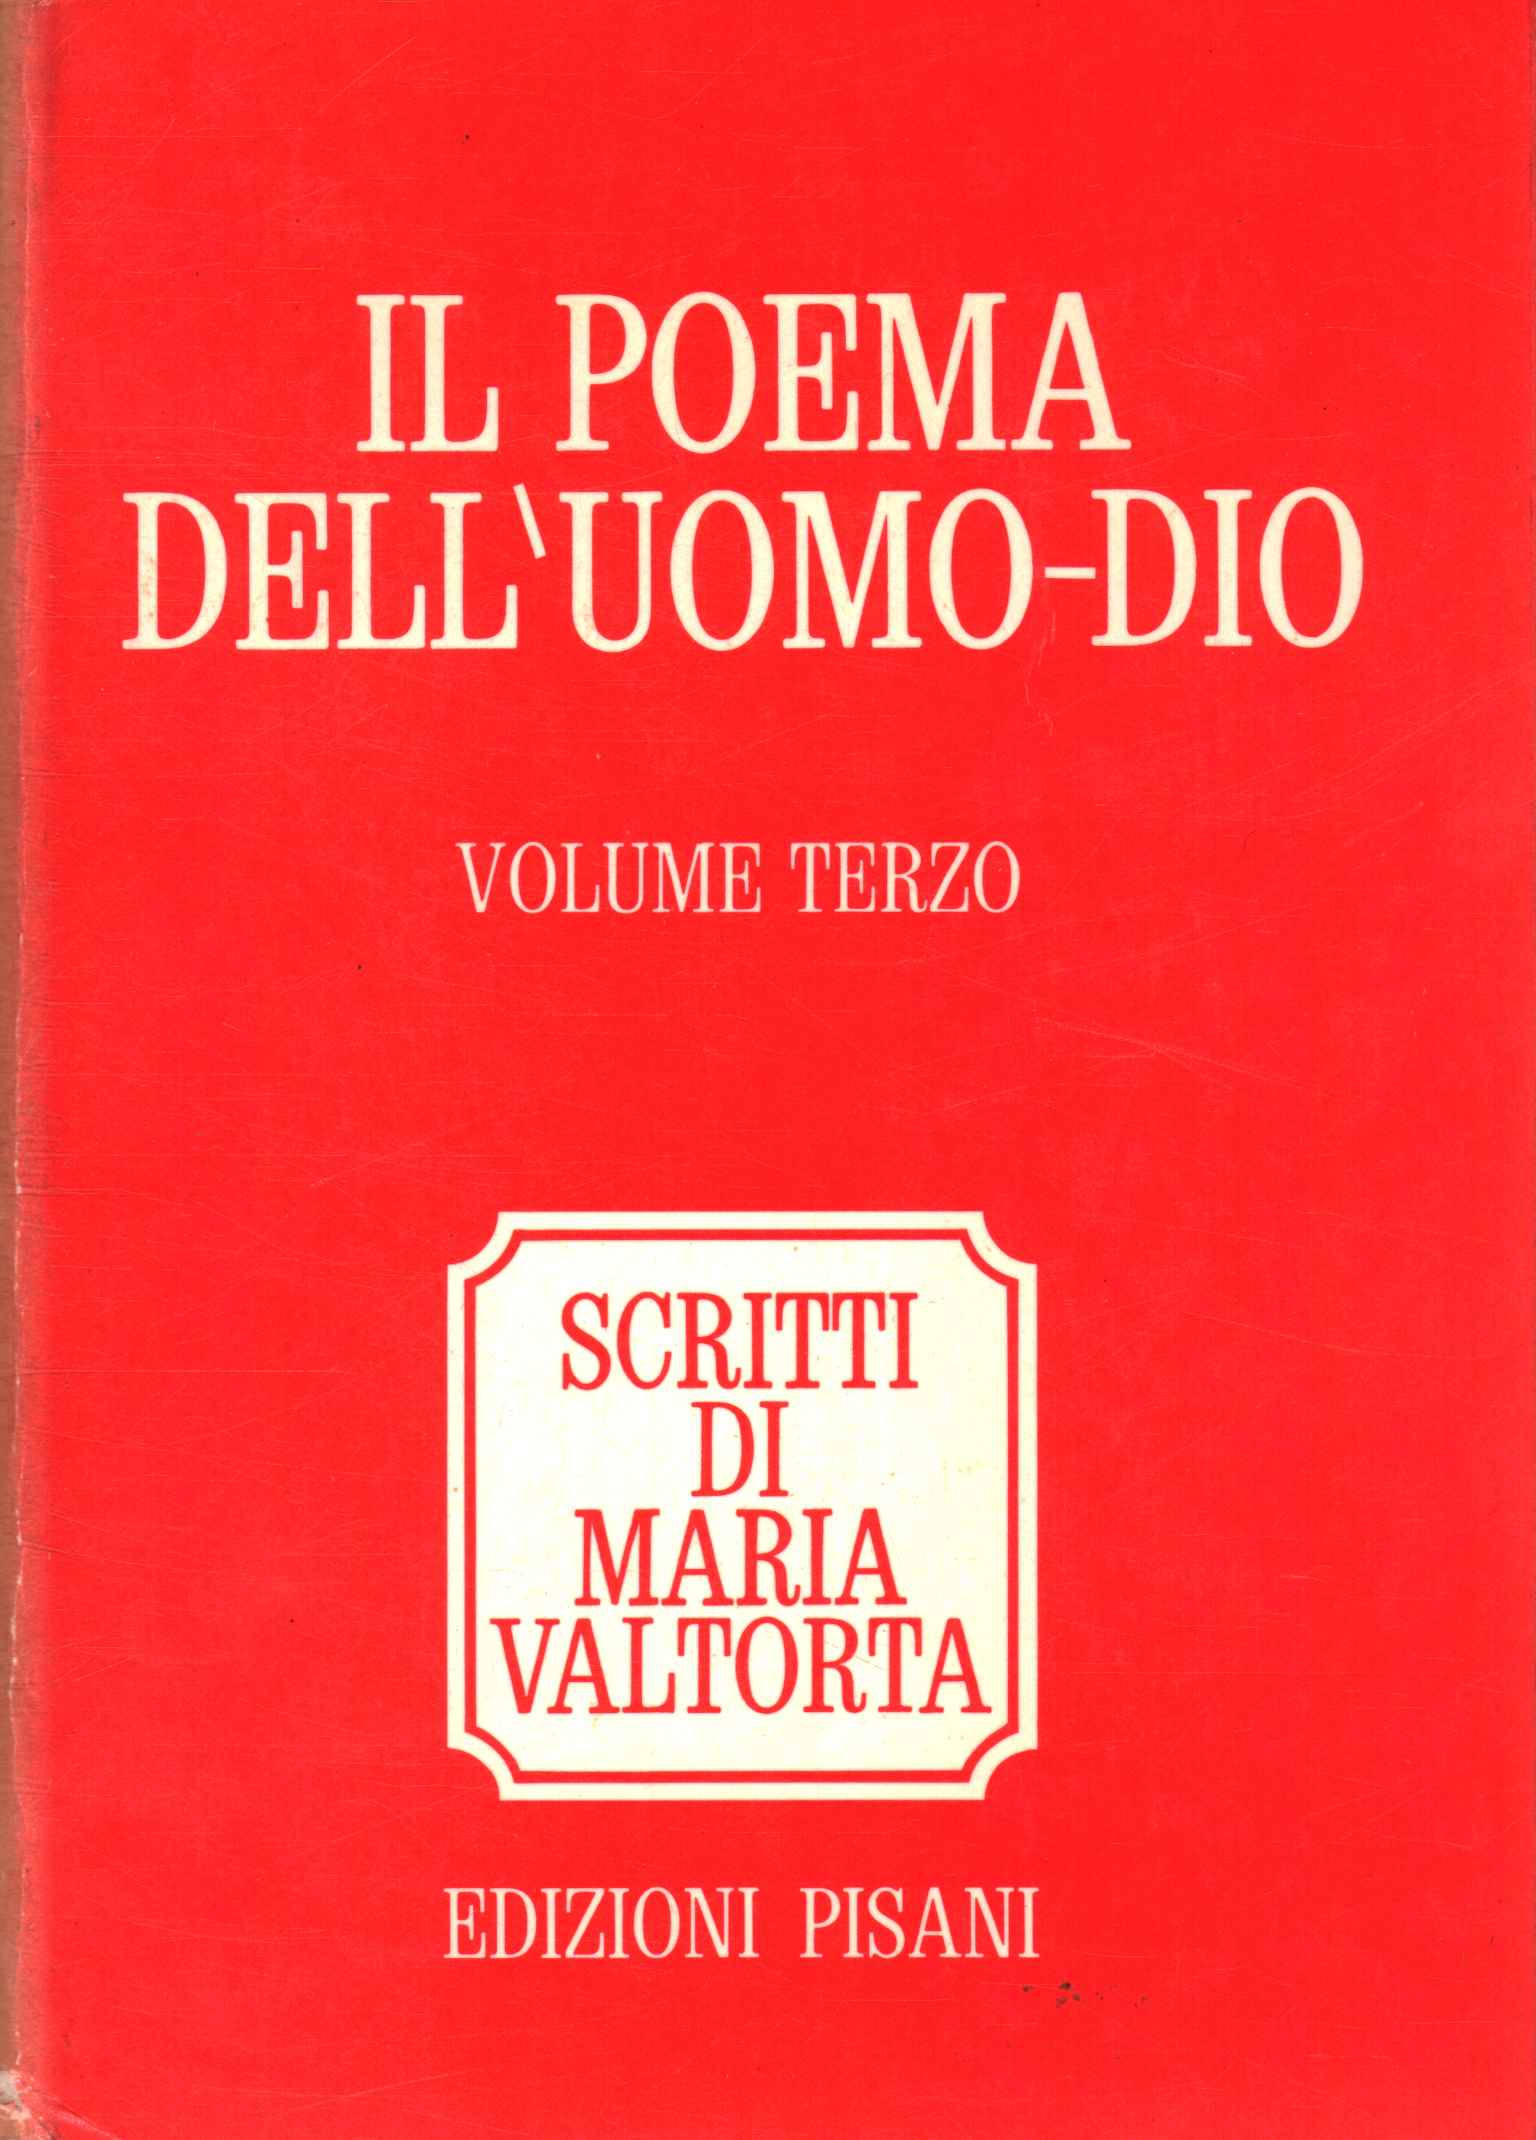 The poem of the man-God III,The poem of the man-God (Volume